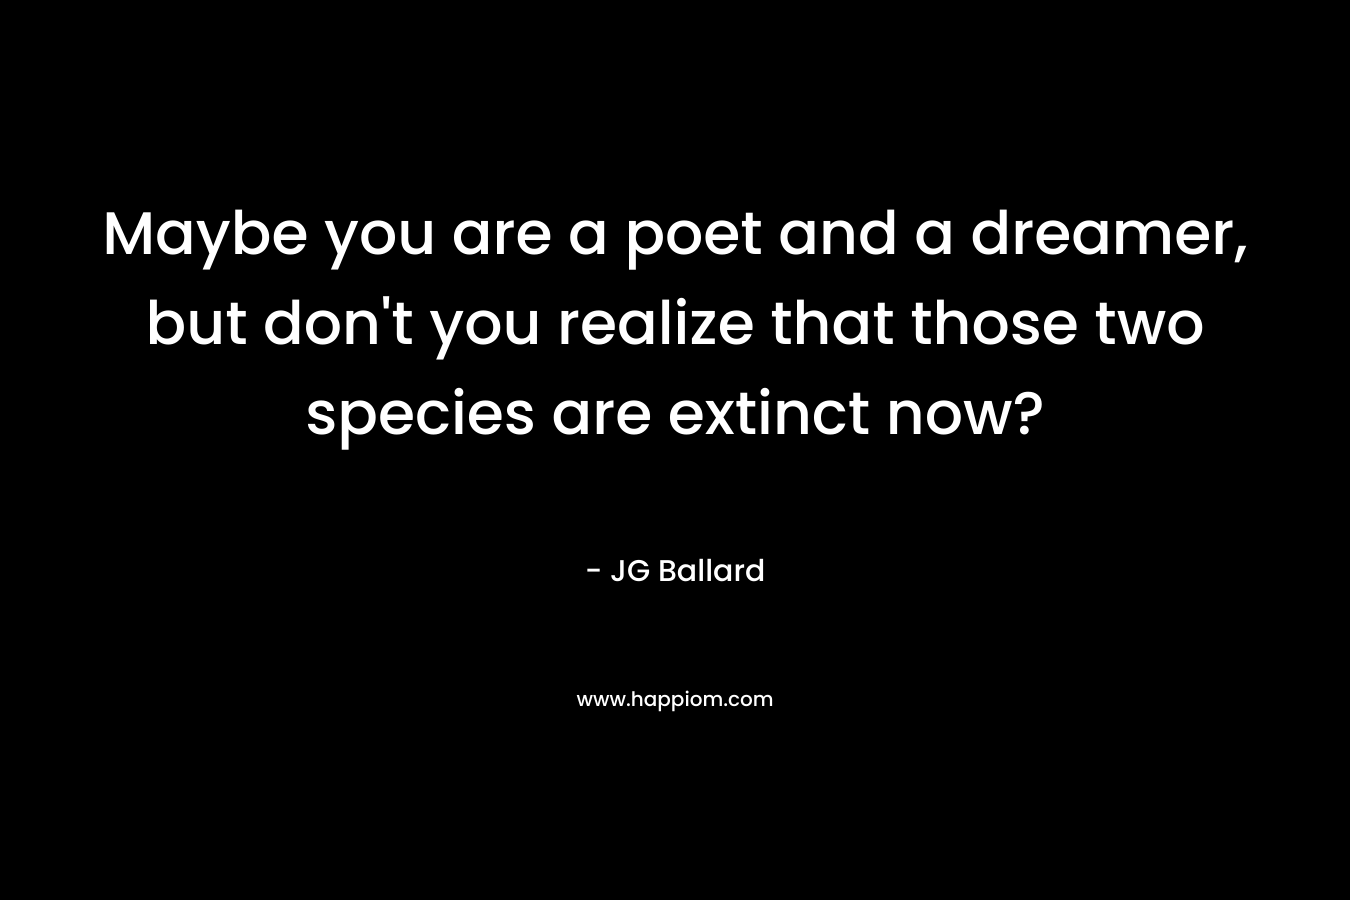 Maybe you are a poet and a dreamer, but don’t you realize that those two species are extinct now? – JG Ballard